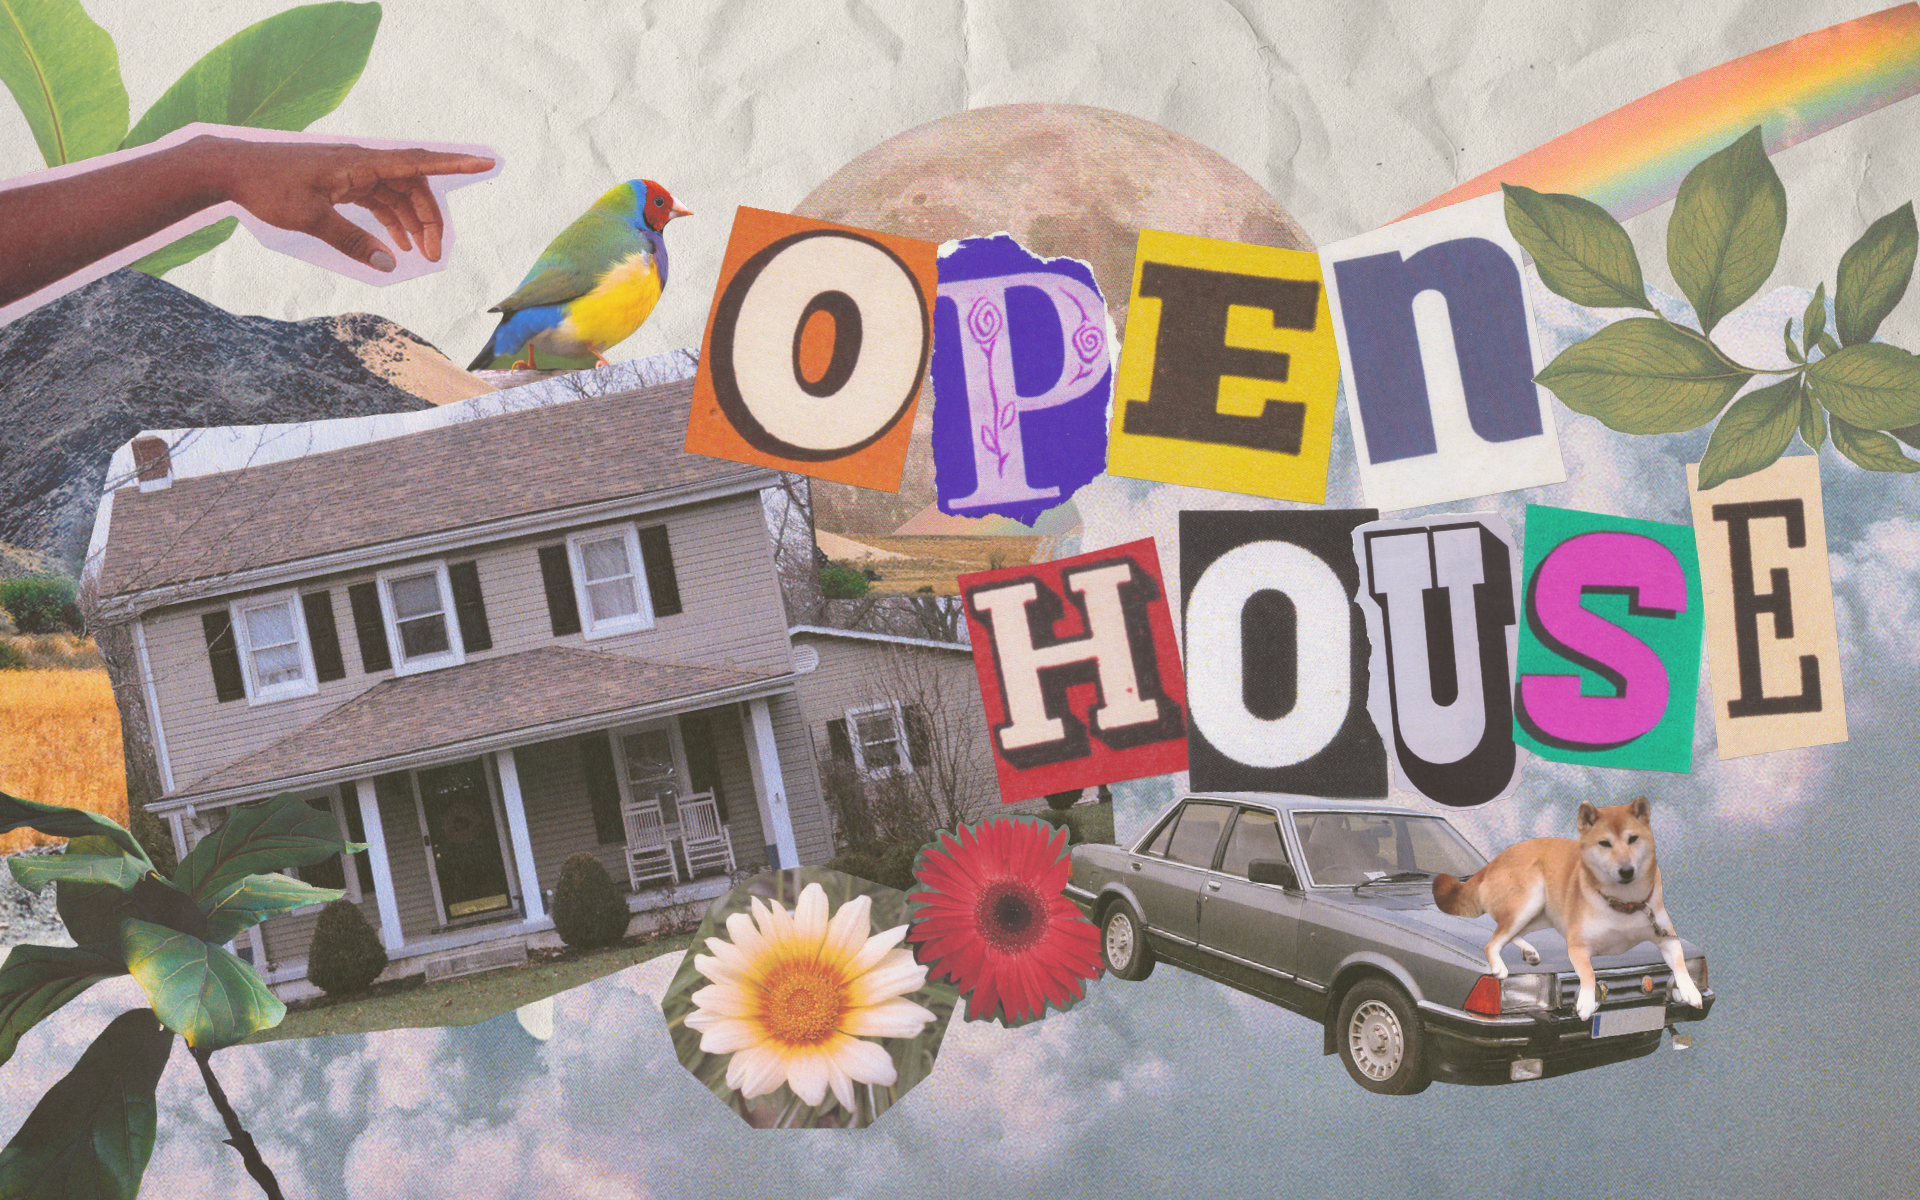 Collage of house, car, dog, plants, flowers, moon, rainbow, hand, bird, and letters that spell out "Open House."